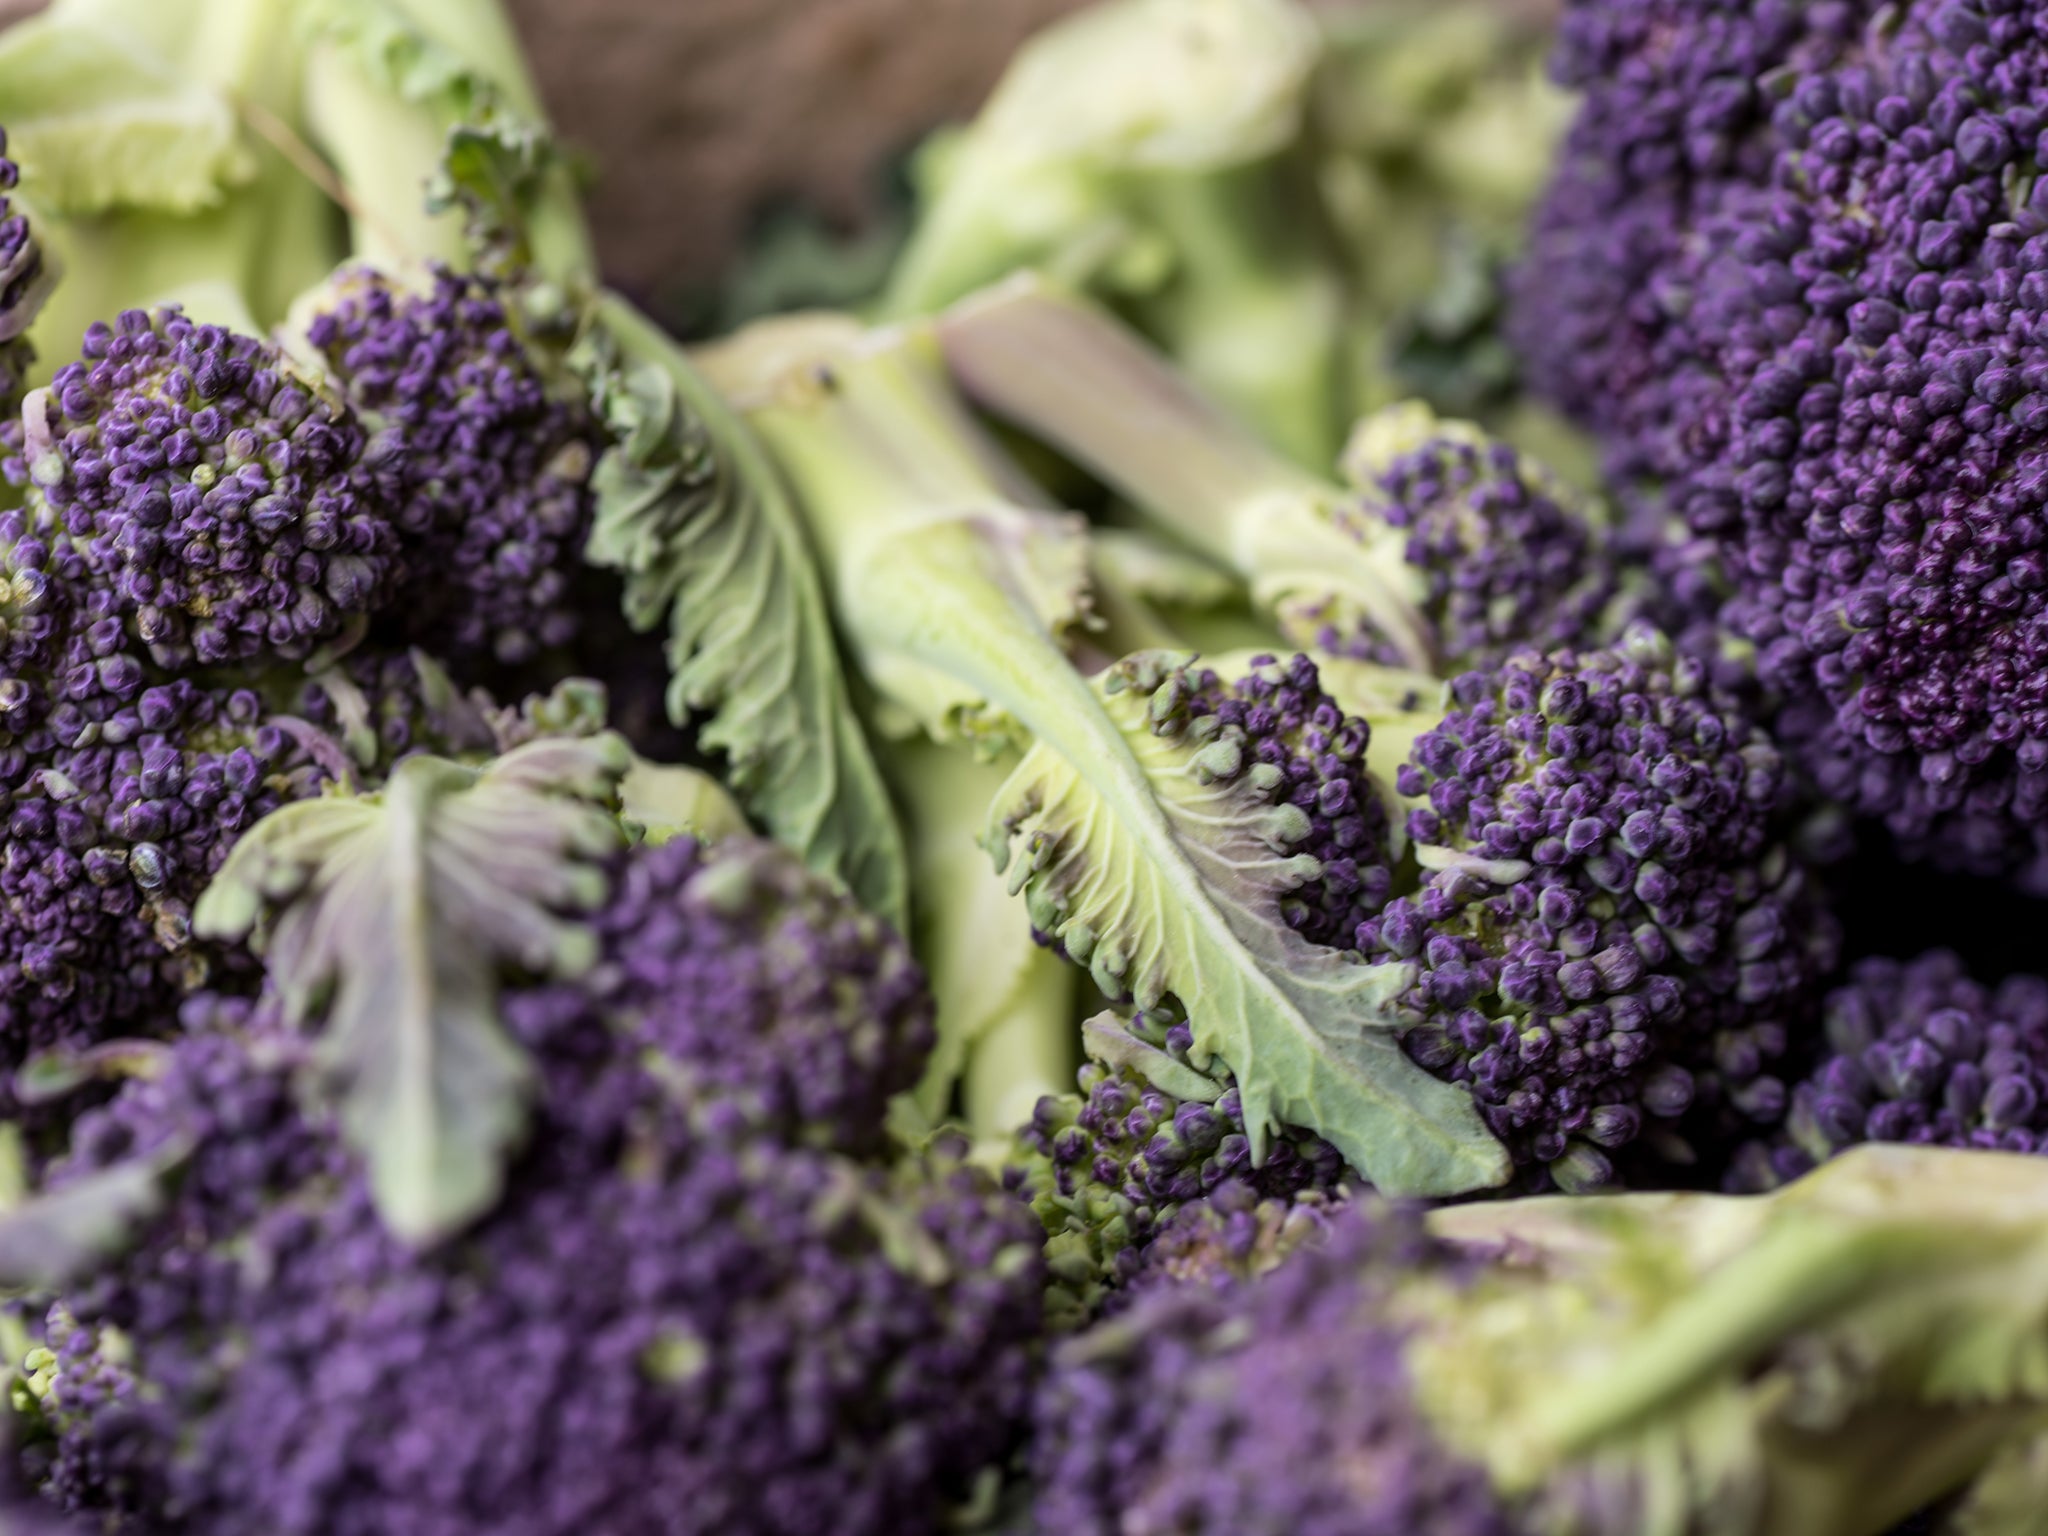 Move over asparagus: purple sprouting broccoli is the first star of spring